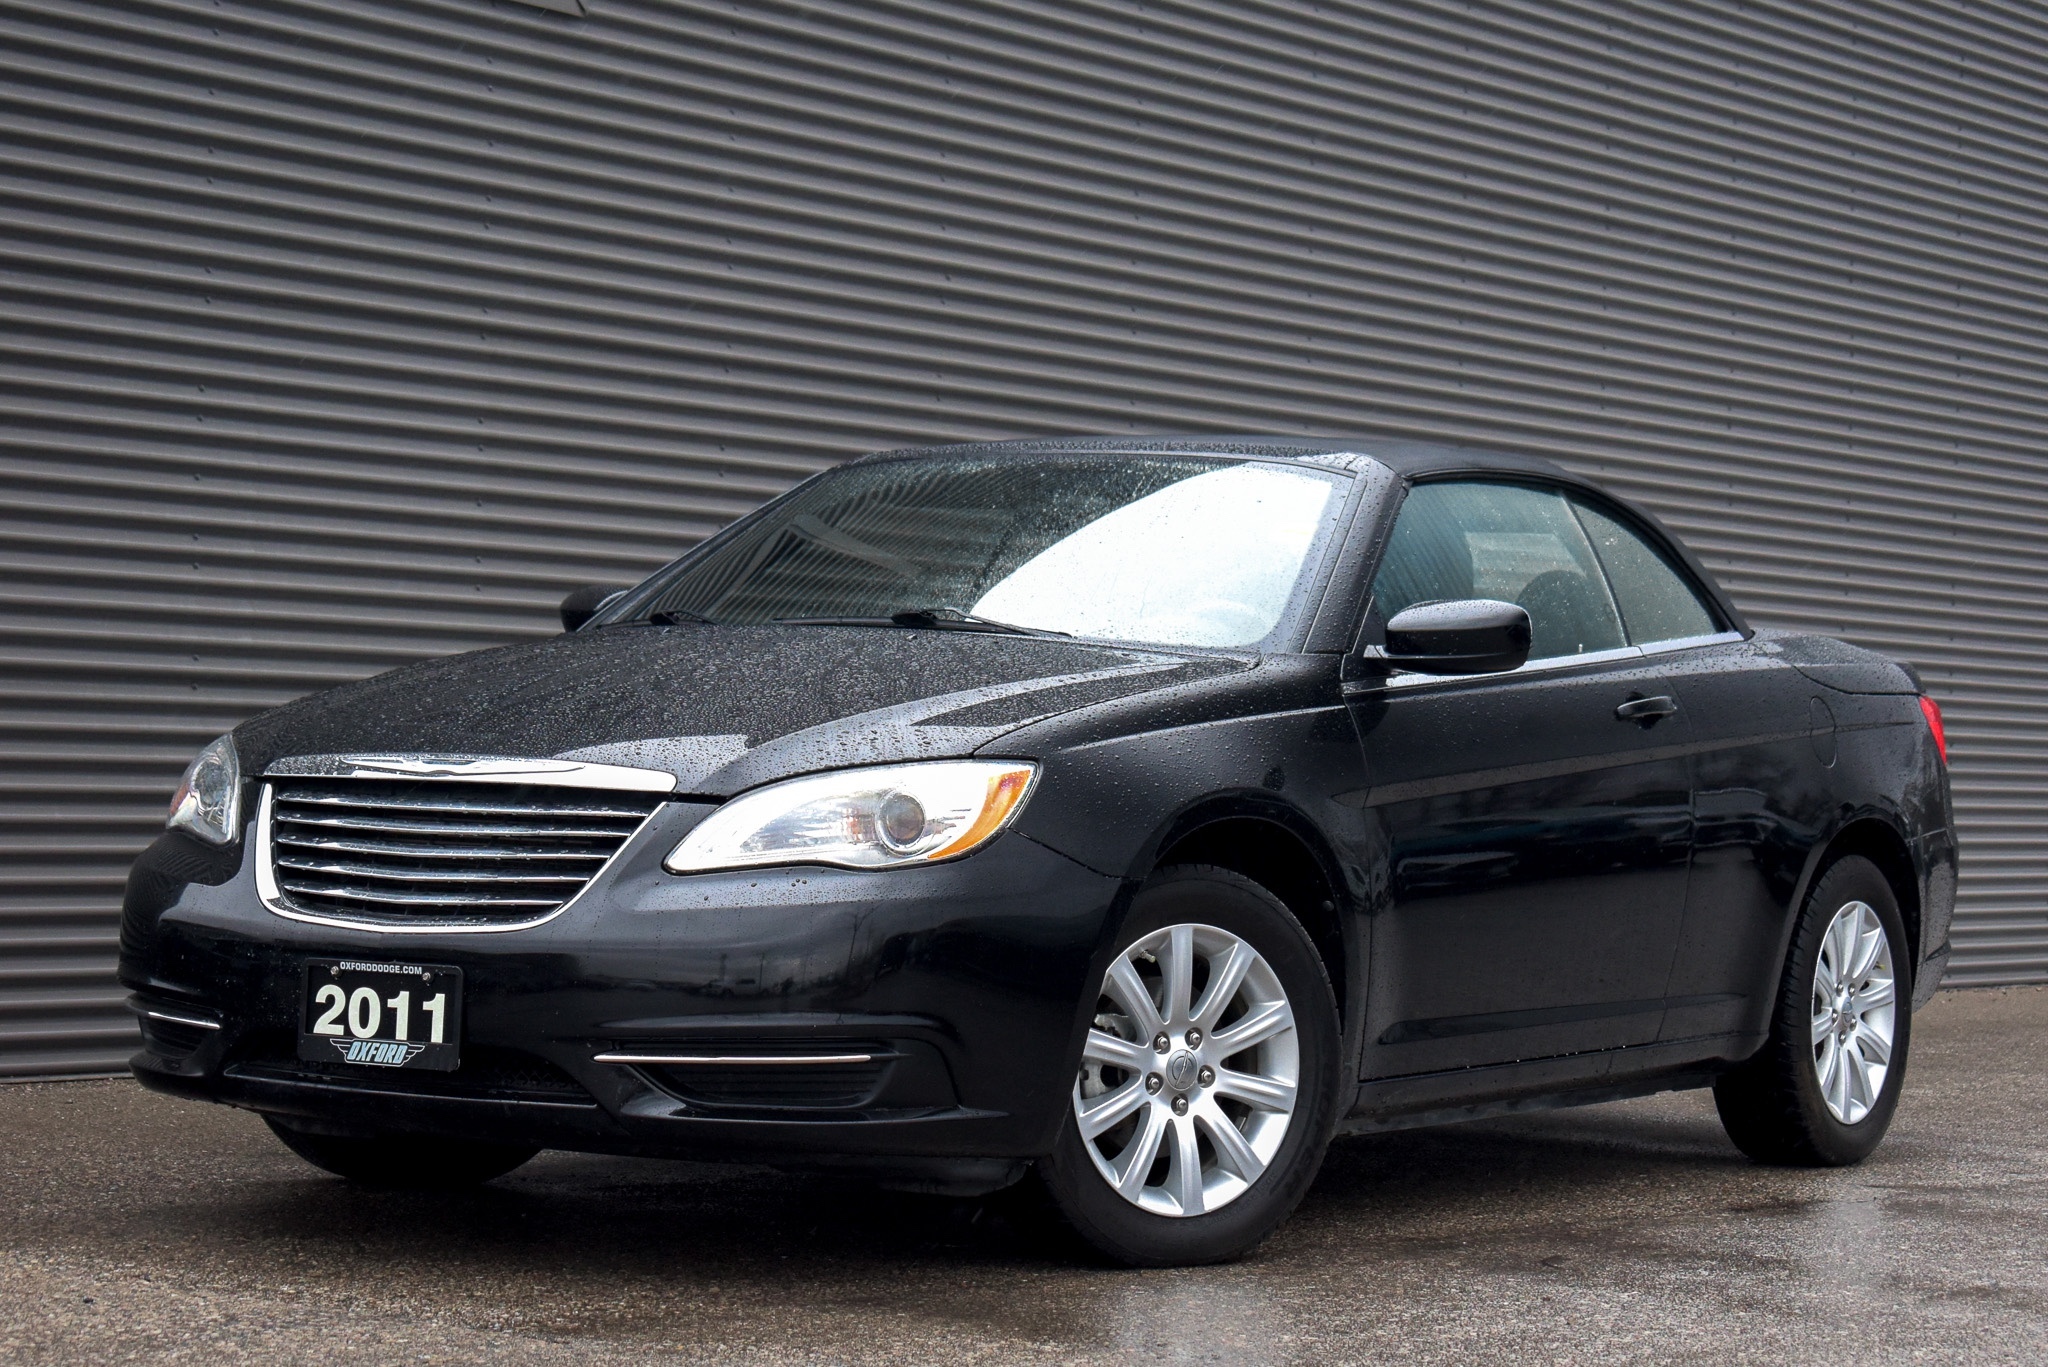 2011 Chrysler 200 LX Very Low Kms, Affordable, Summer Fun